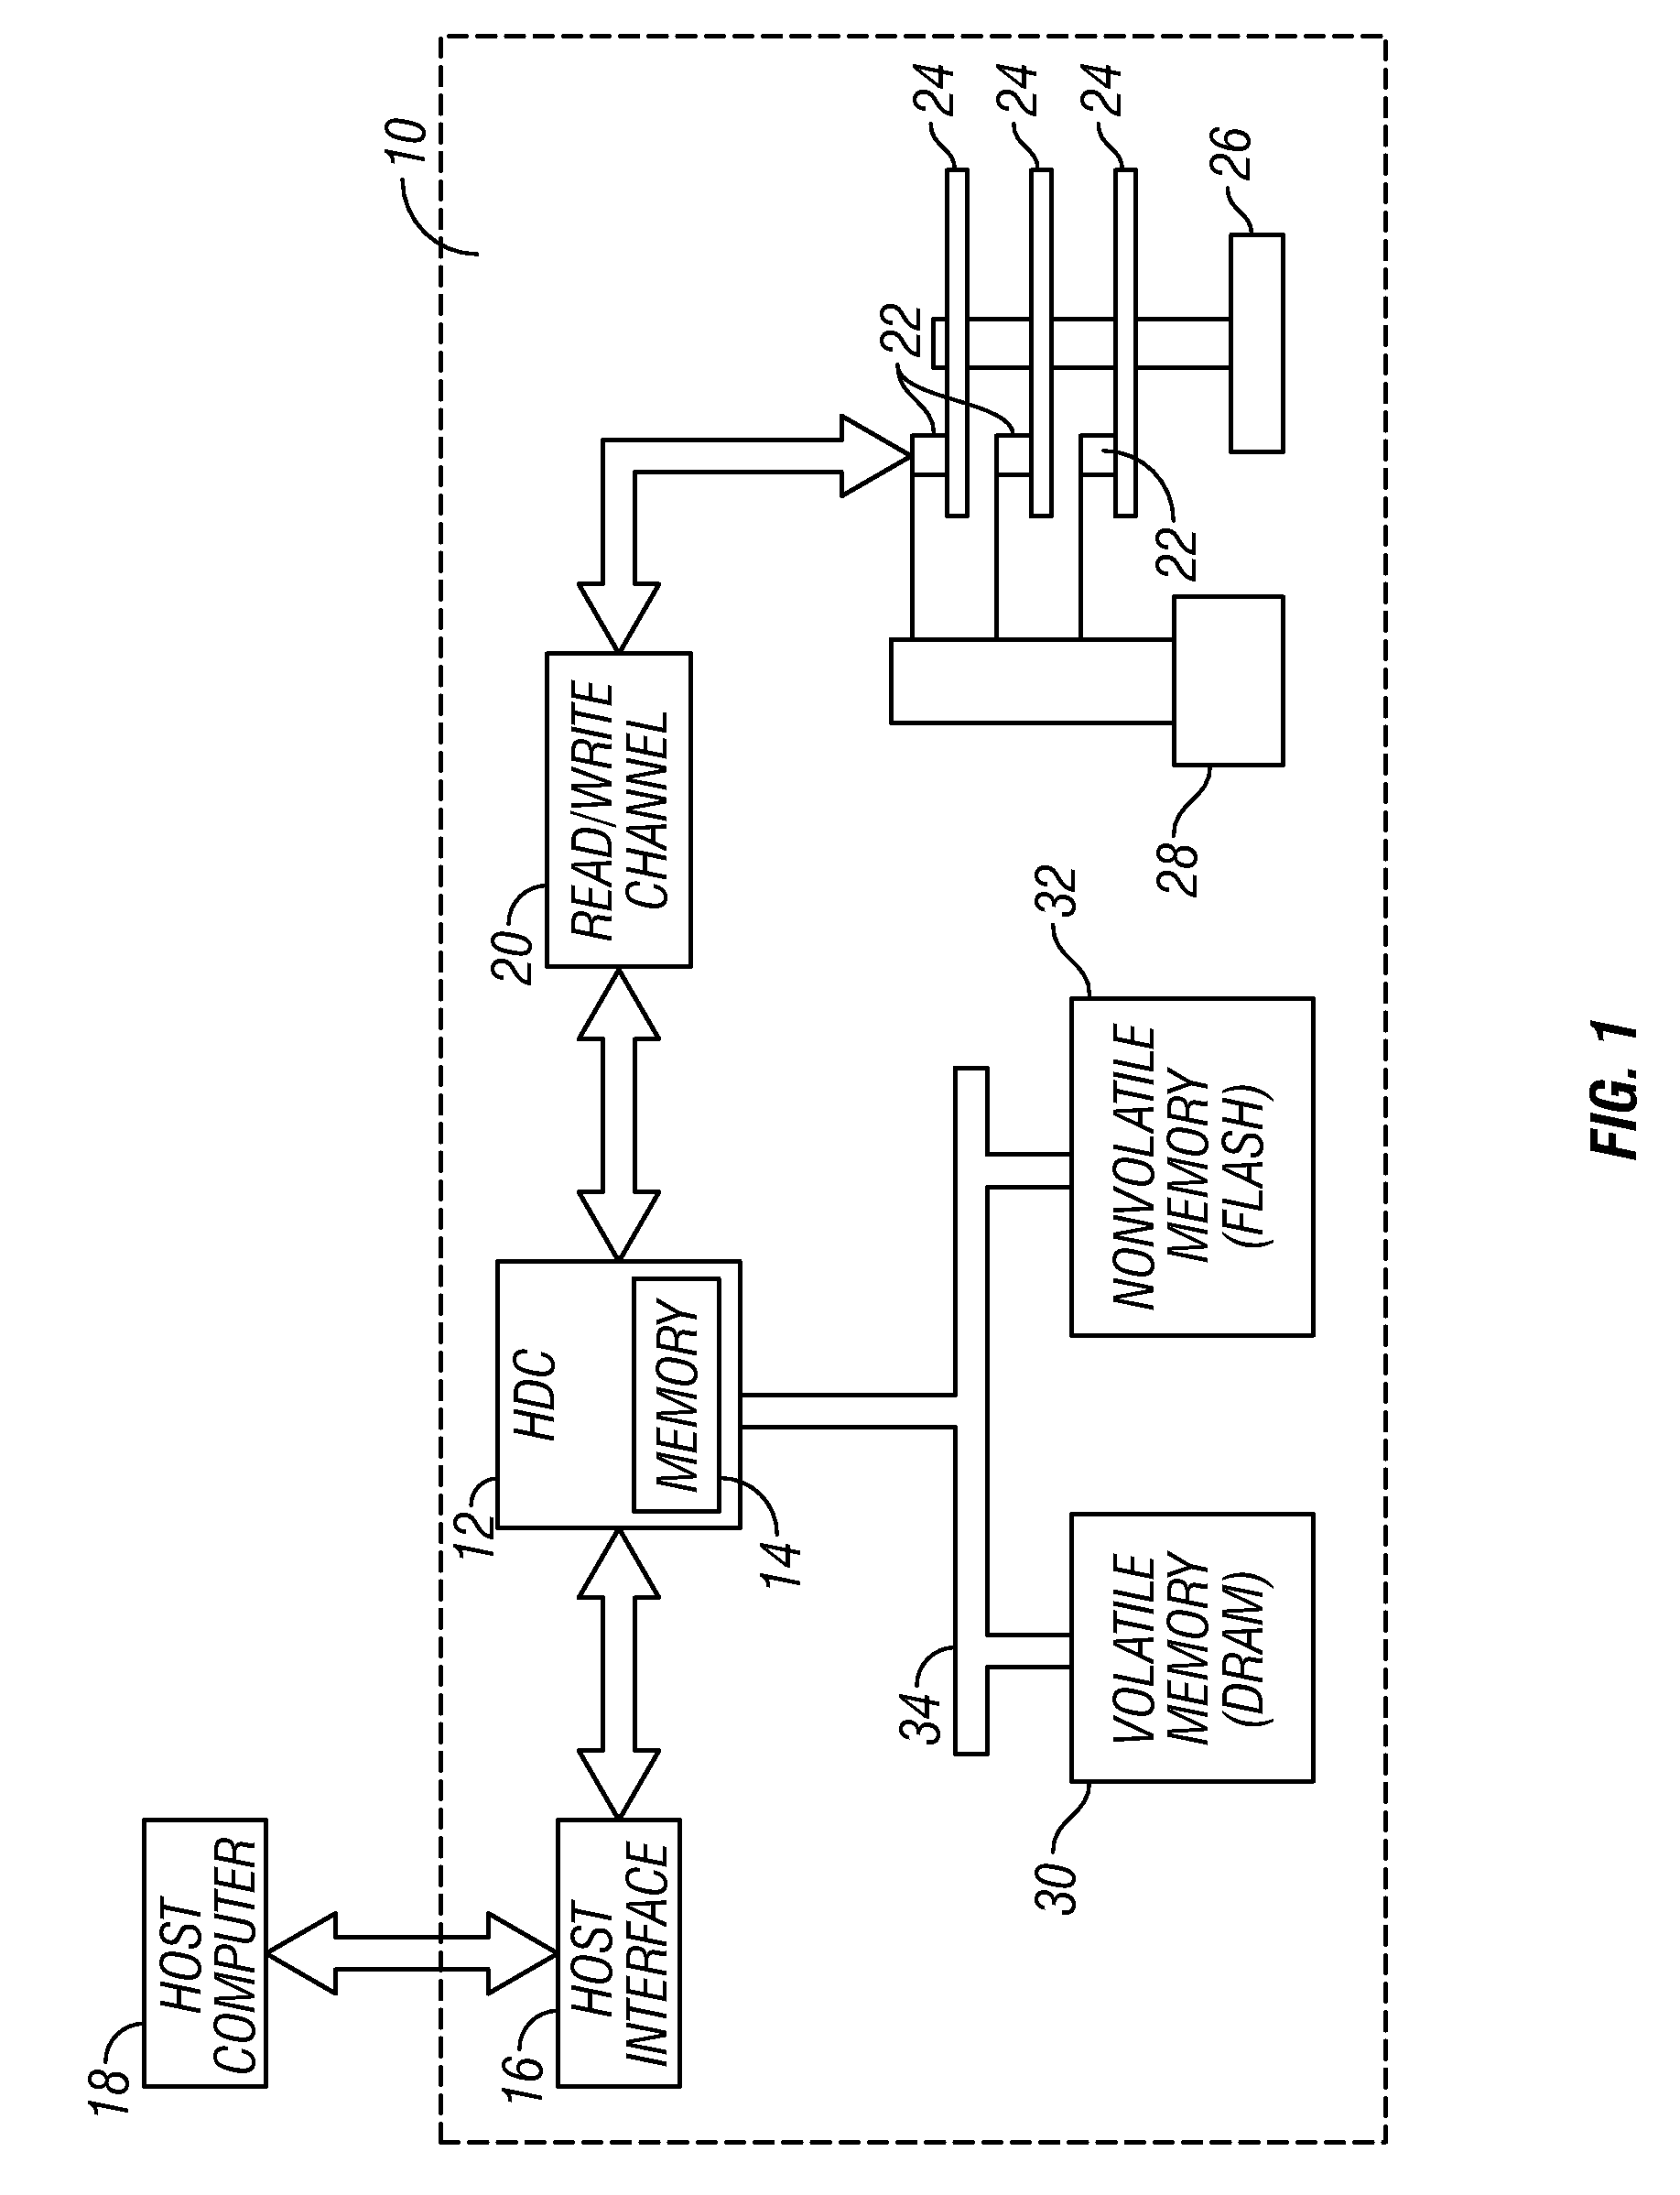 Disk drive with nonvolatile memory having multiple modes of operation